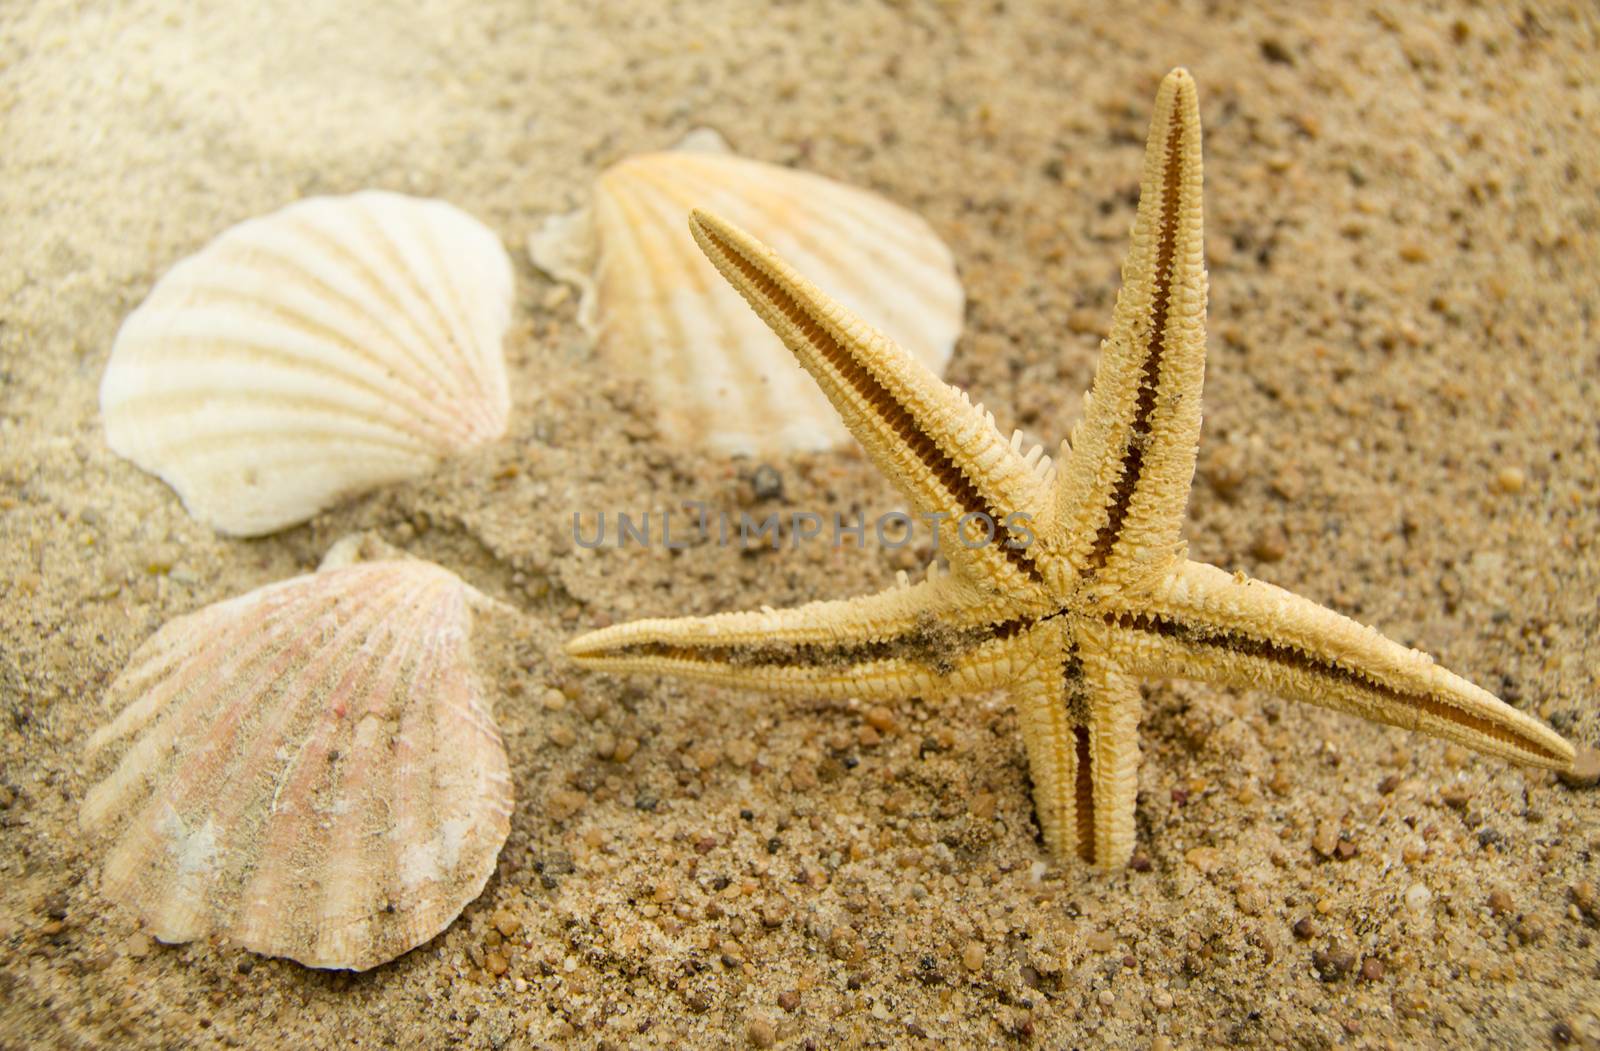 Concept of a beach holiday and travelling. Starfish, shells on the sandy beach.